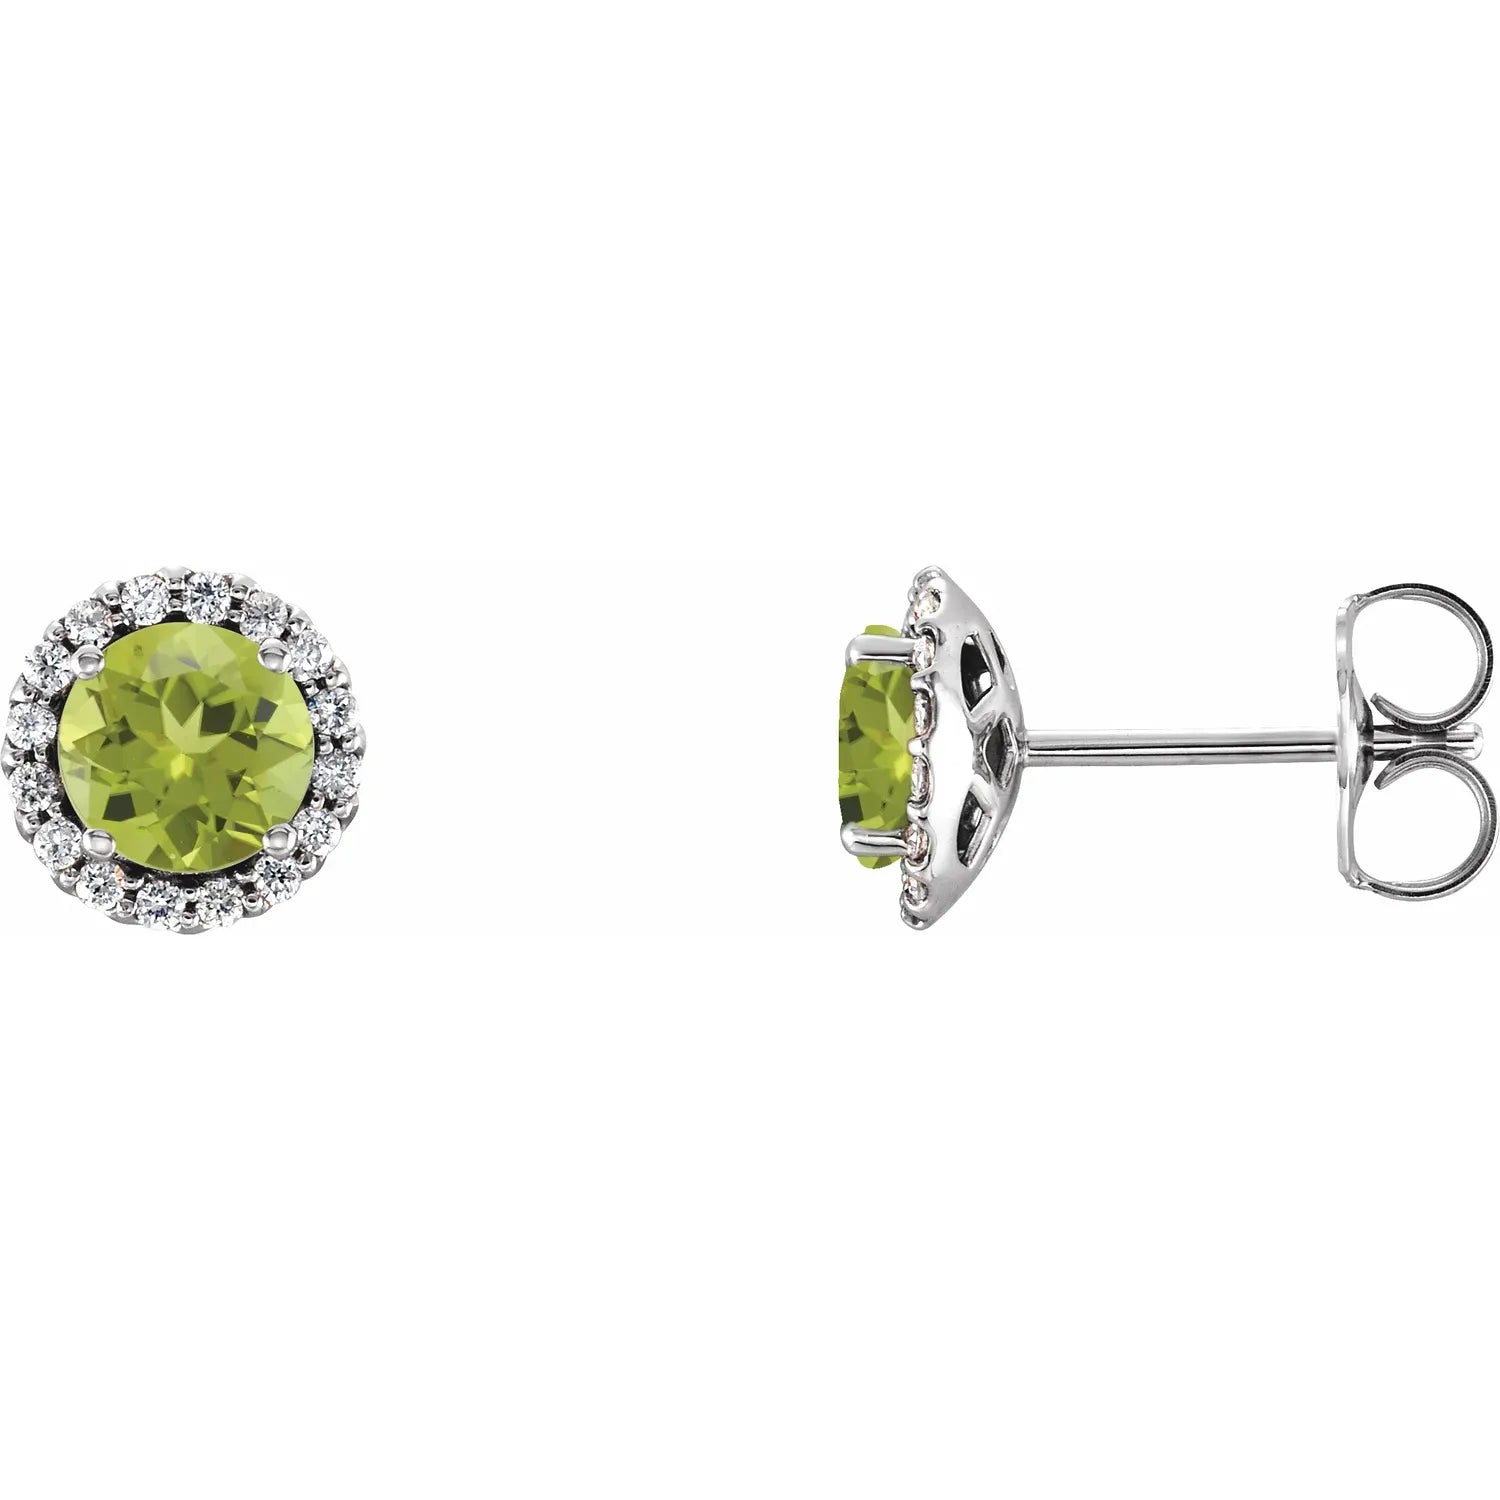 Gemstone and Diamond Halo Stud Earrings in 14K White Gold